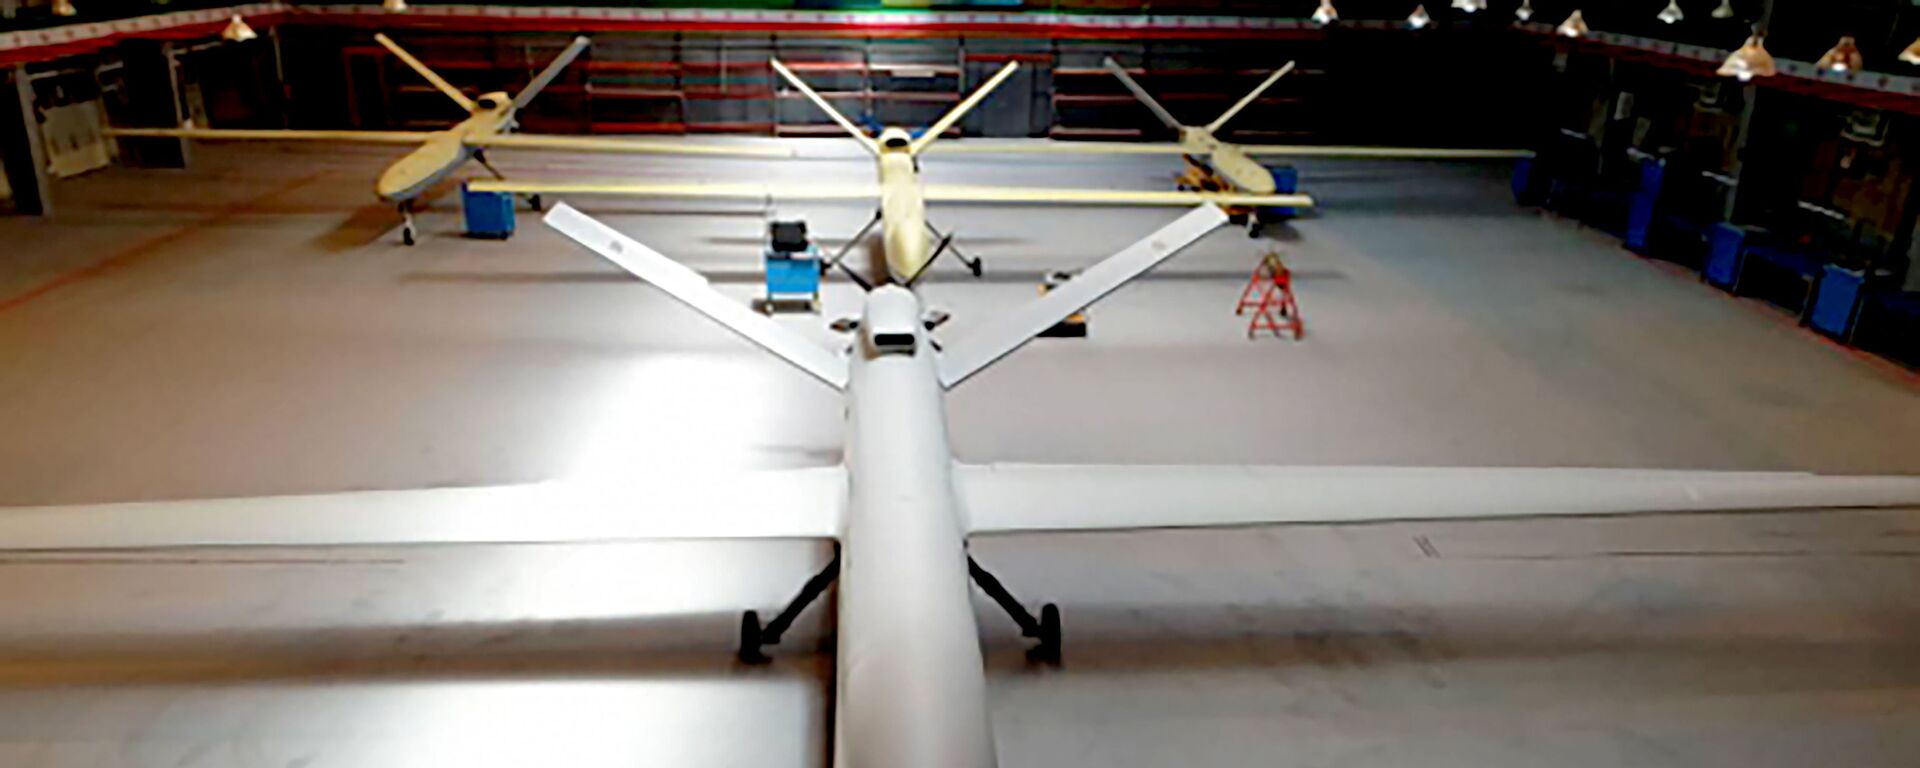 In this photo released on Saturday, May 21, 2021, by Sepahnews, the website of the Iranian Revolutionary Guard, a new Gaza drone is displayed in an undisclosed location in Iran. (Sepahnews via AP) - Sputnik International, 1920, 29.10.2021